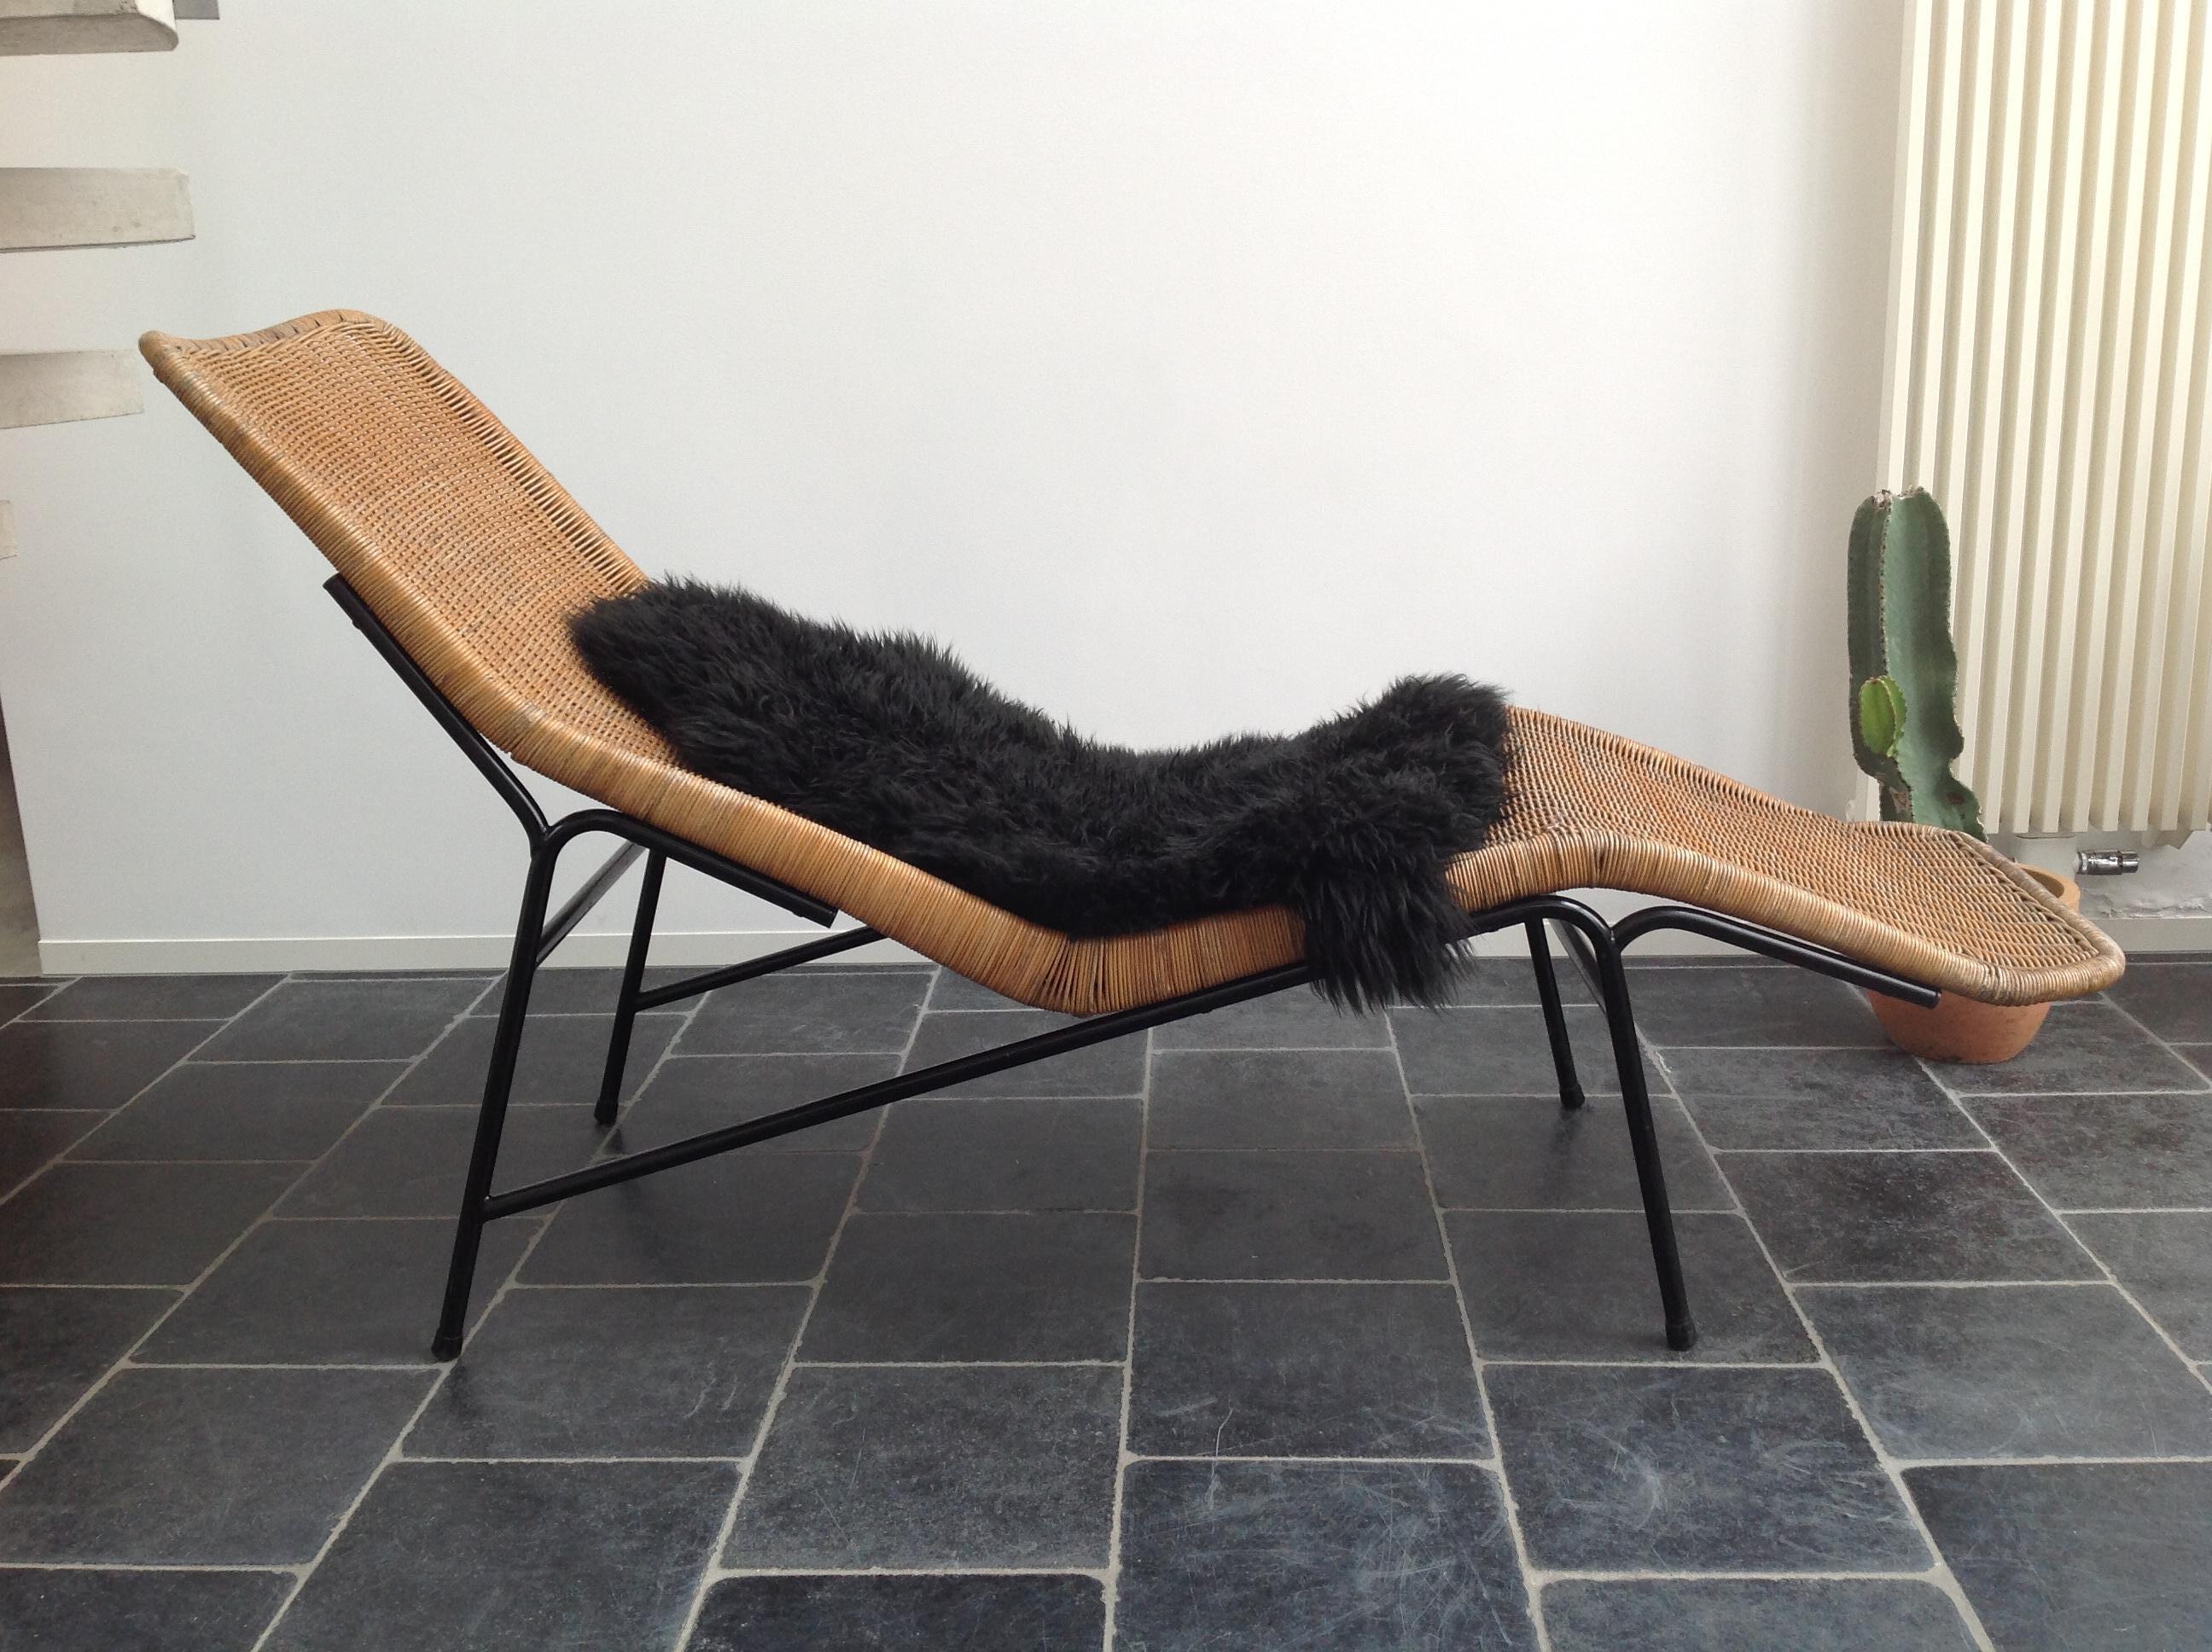 Chaise Longue in Cane, Wicker, Design by Dirk Van Sliedrecht for Rohé, 1960s For Sale 1